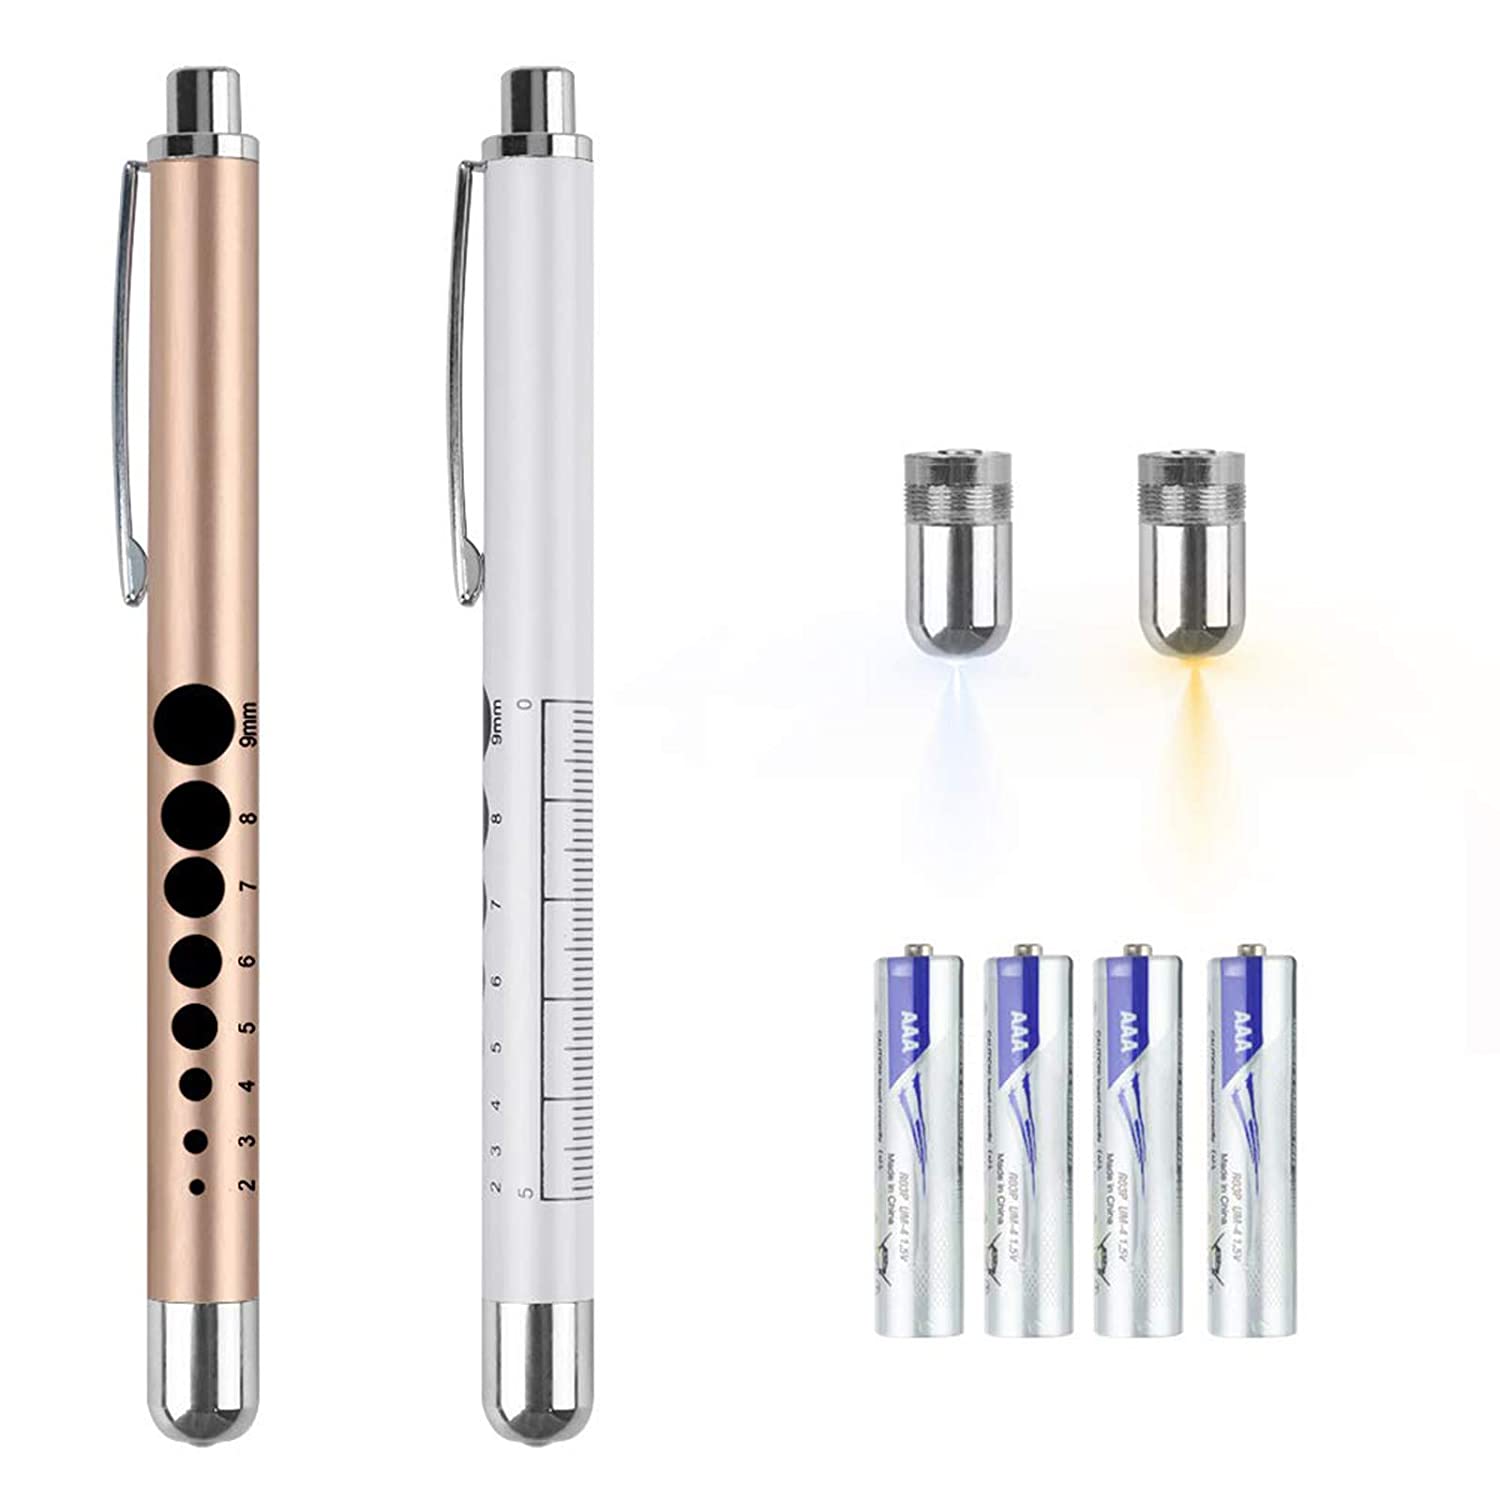 SMART WORLD Golden royal looking Pen set COMBO contains Golden slim ball  pen ,Caducues logo penstand,Scthescope keychain,best for Clinics,doctors,medical  students,hospitals,birthdays. Pen Gift Set - Buy SMART WORLD Golden royal  looking Pen set